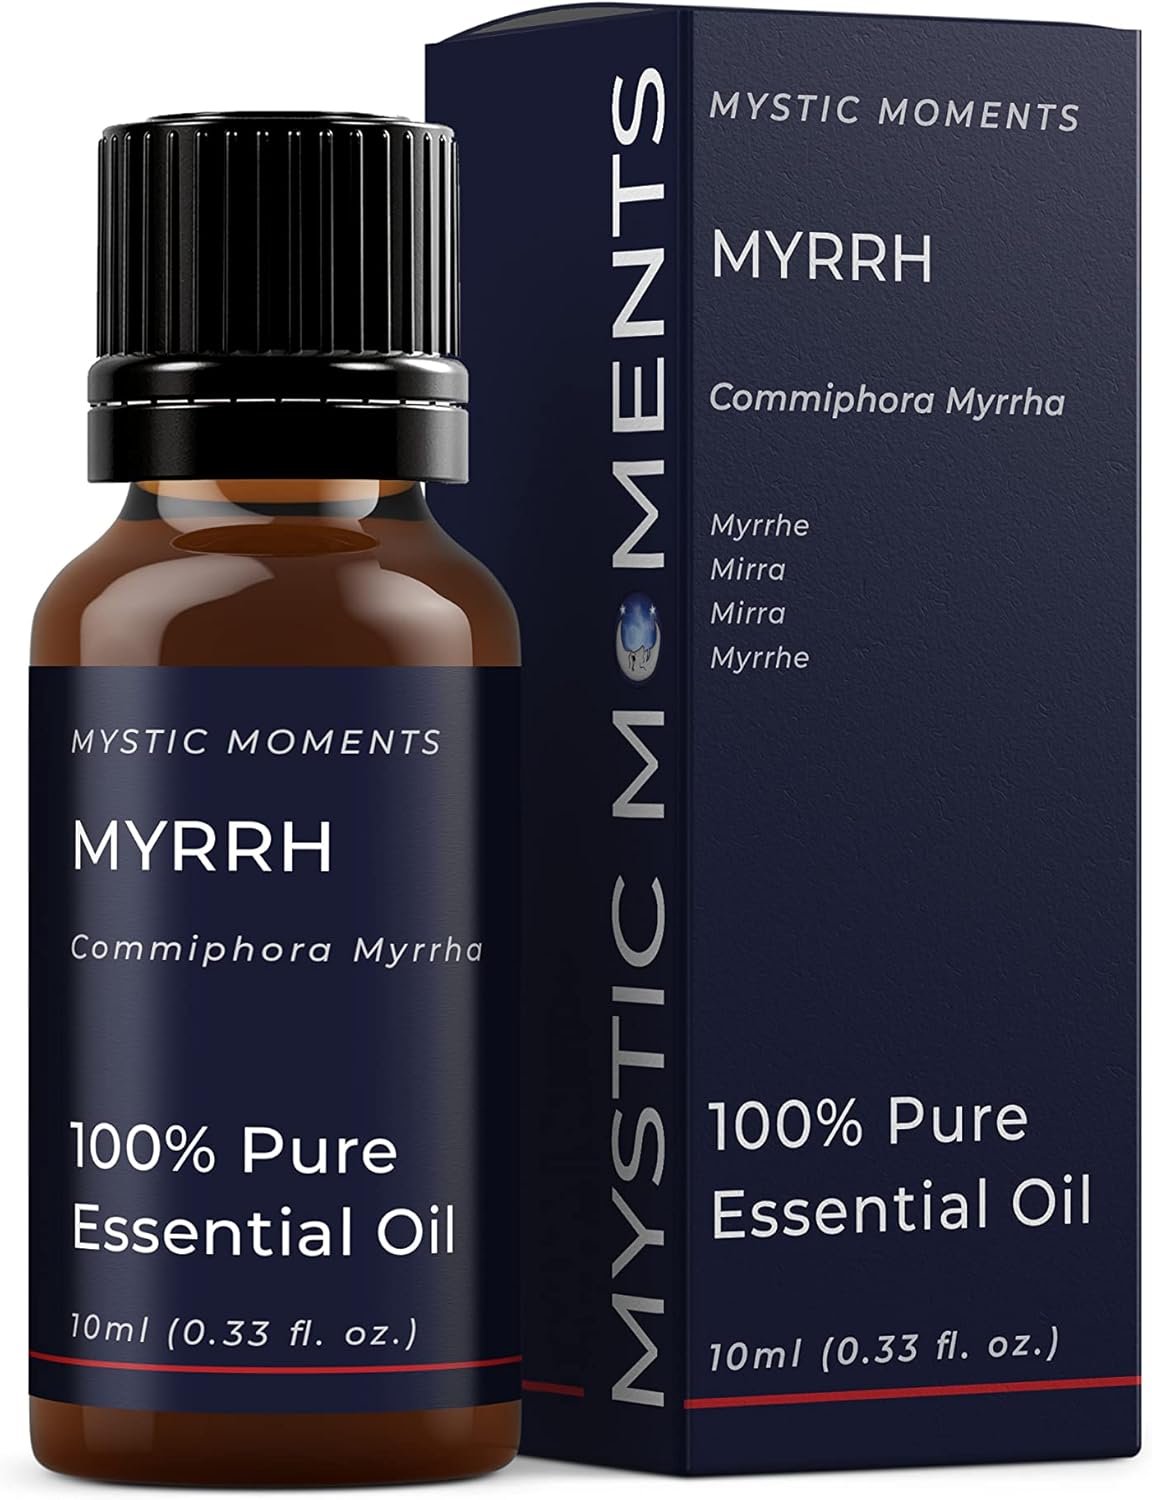 Mystic Moments | Myrrh Essential Oil 10ml - Pure & Natural oil for Diffusers, Aromatherapy & Massage Blends Vegan GMO Free